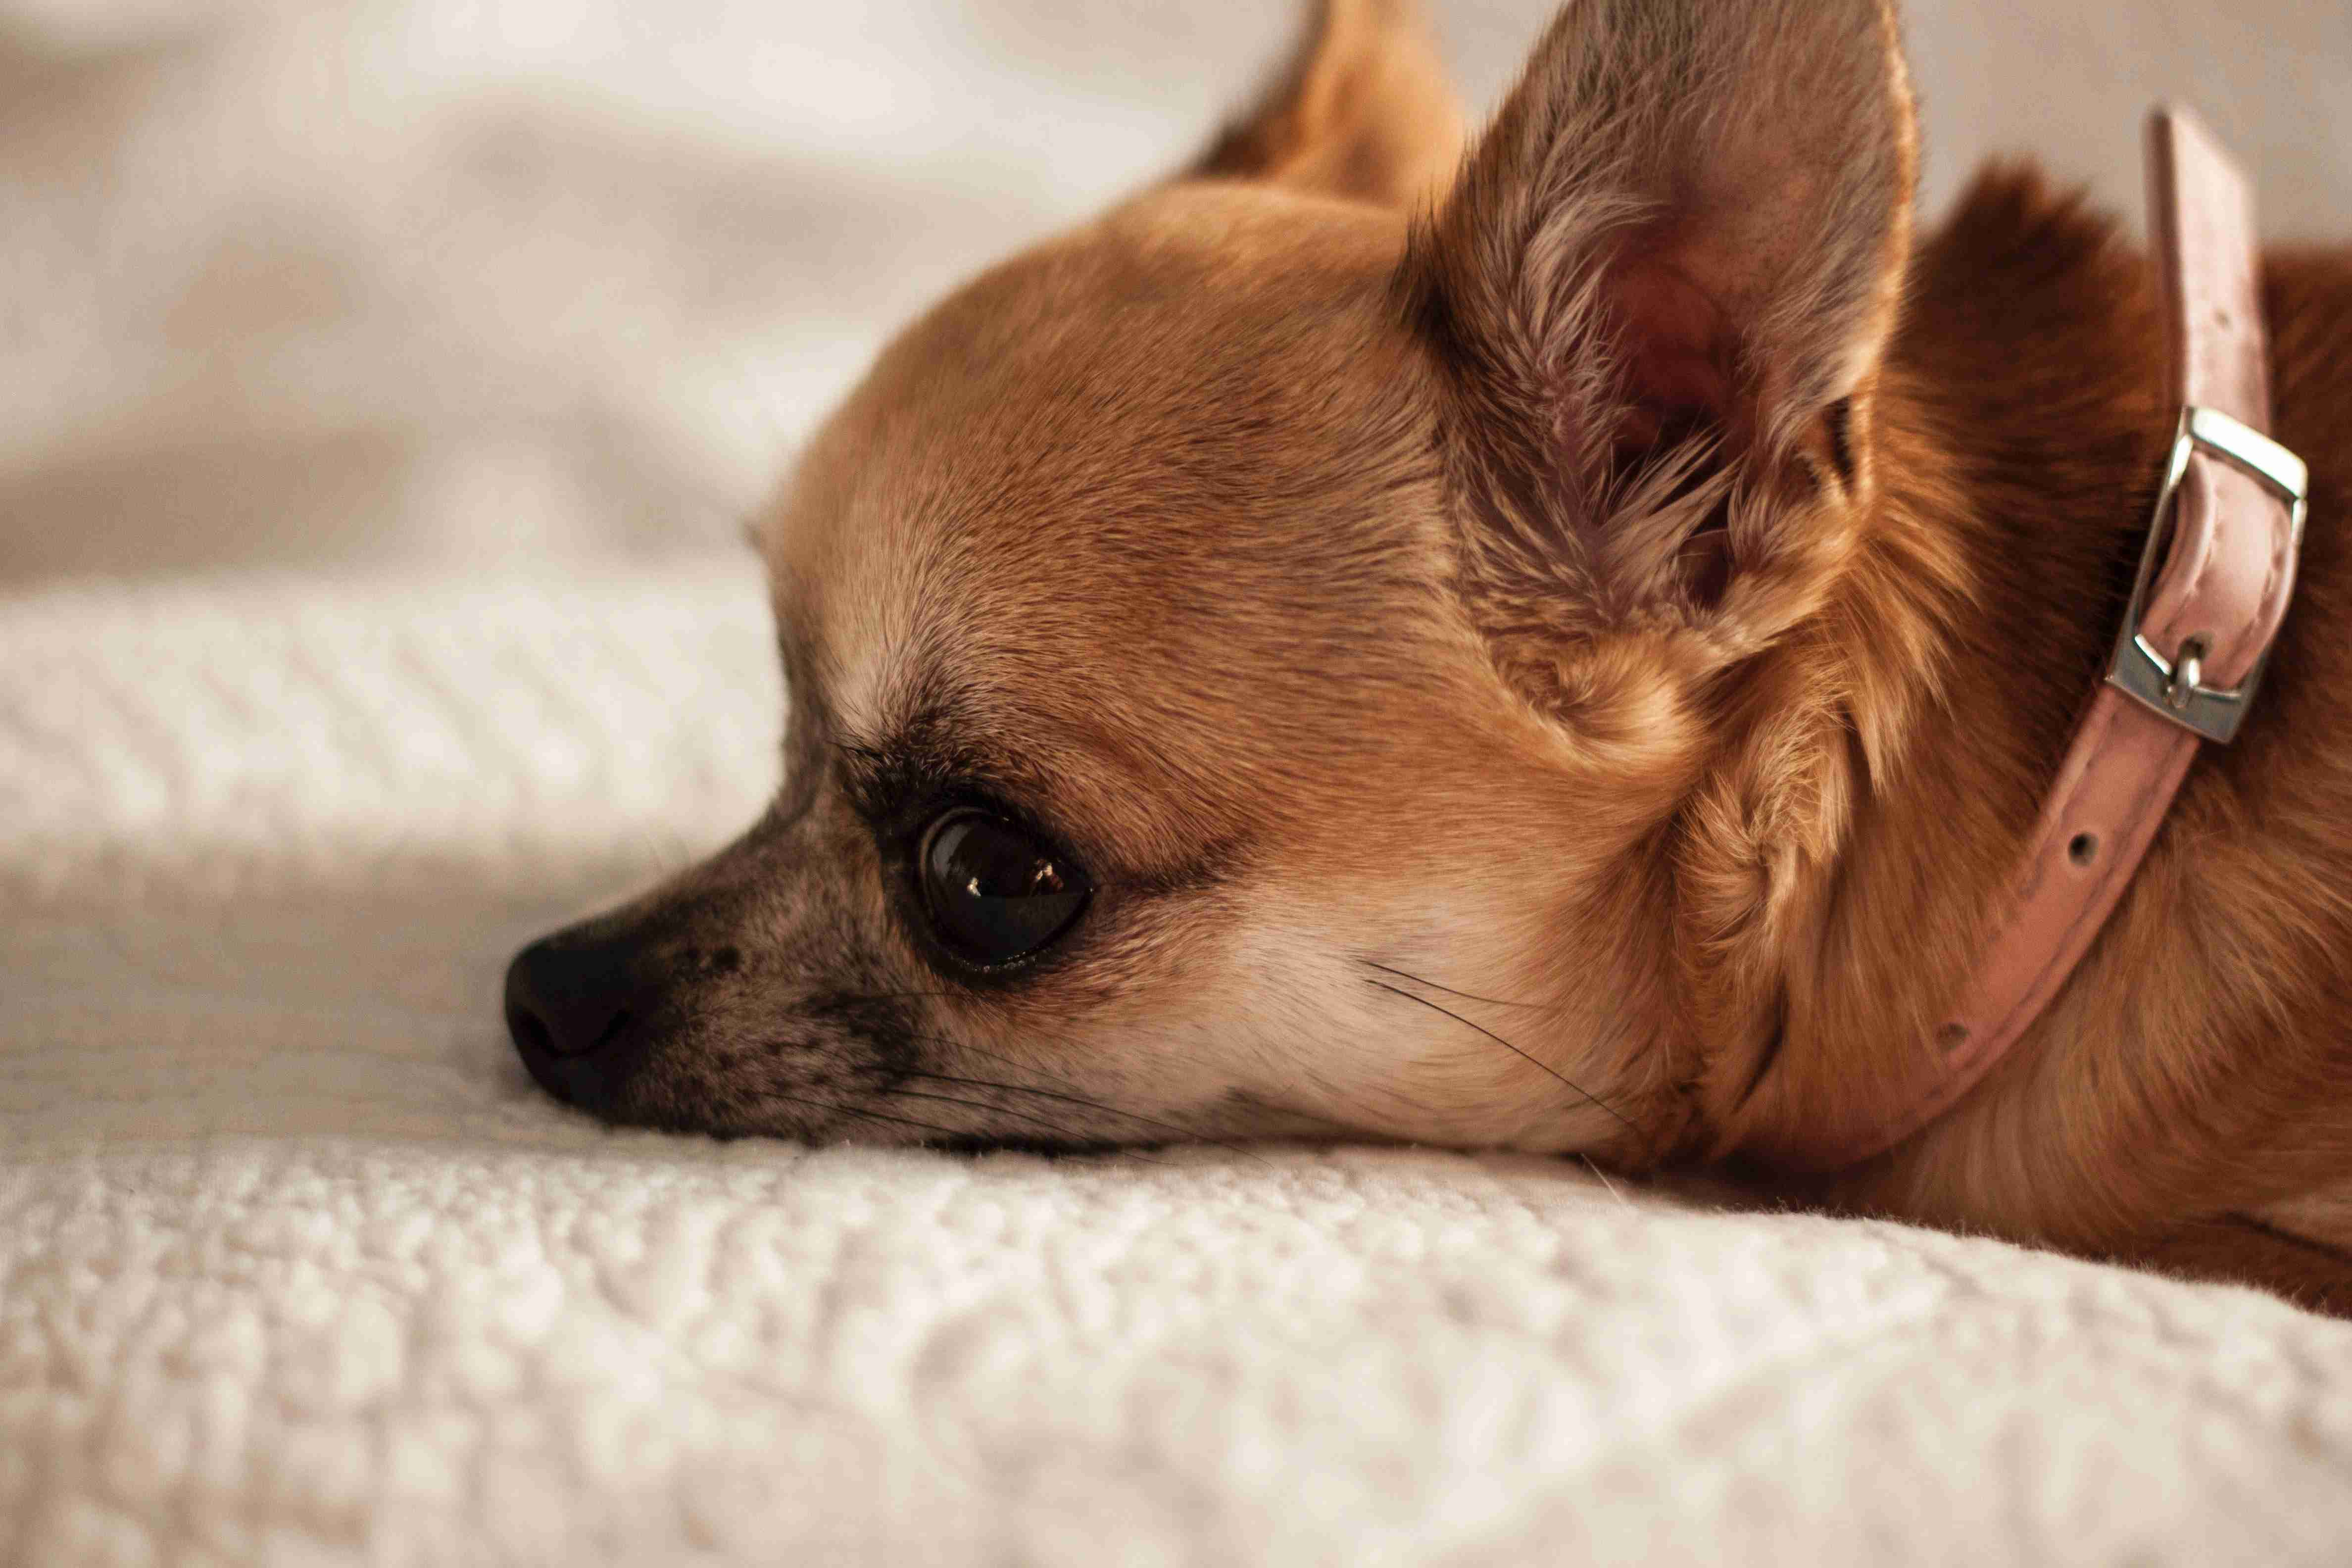 How can you tell if your Chihuahua is displaying aggressive behavior?